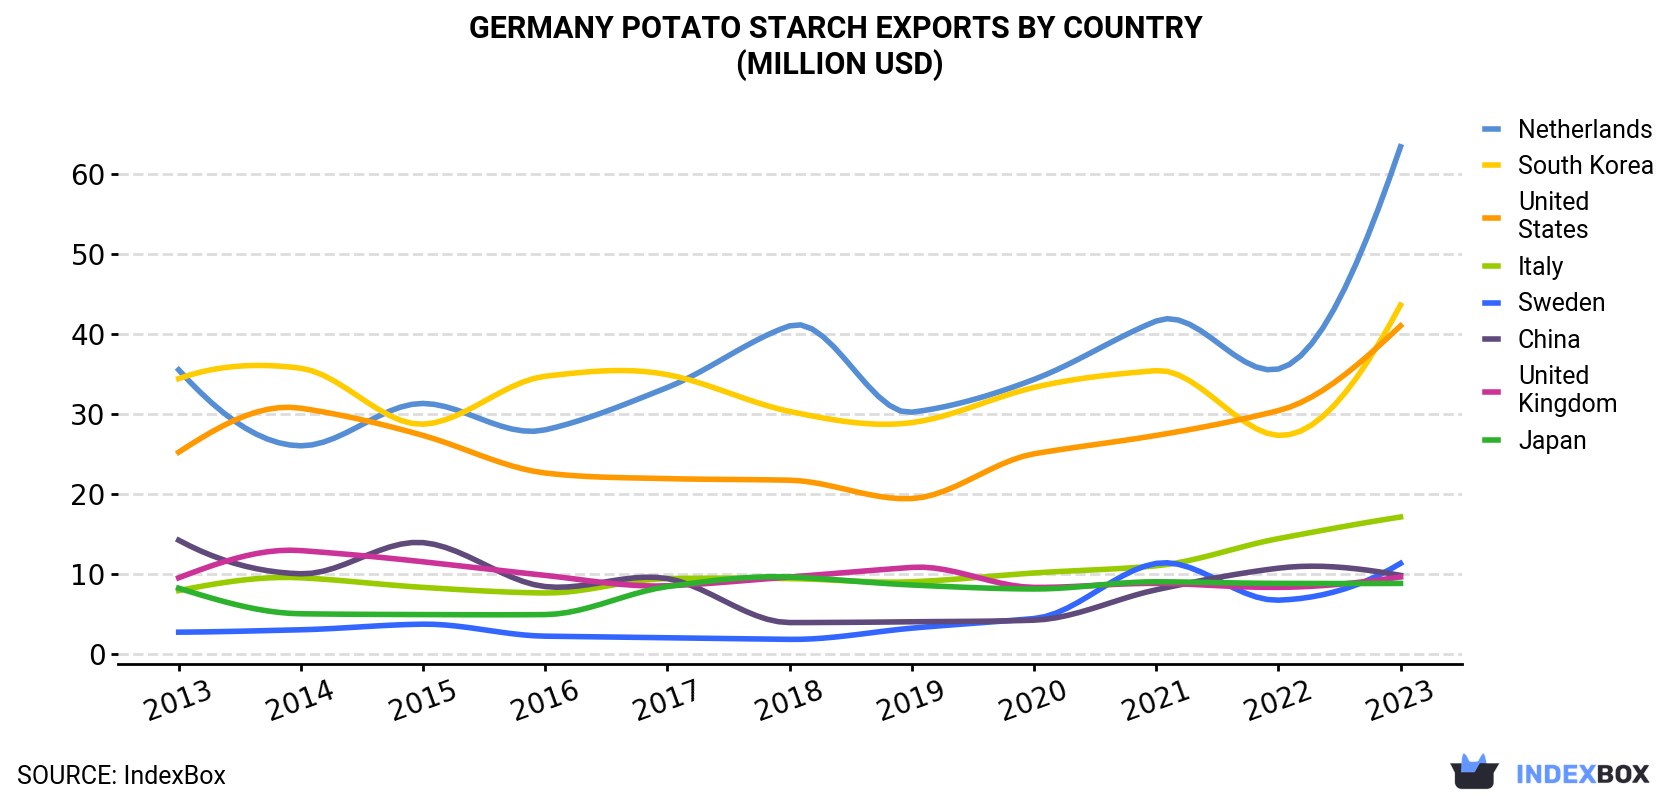 Germany Potato Starch Exports By Country (Million USD)